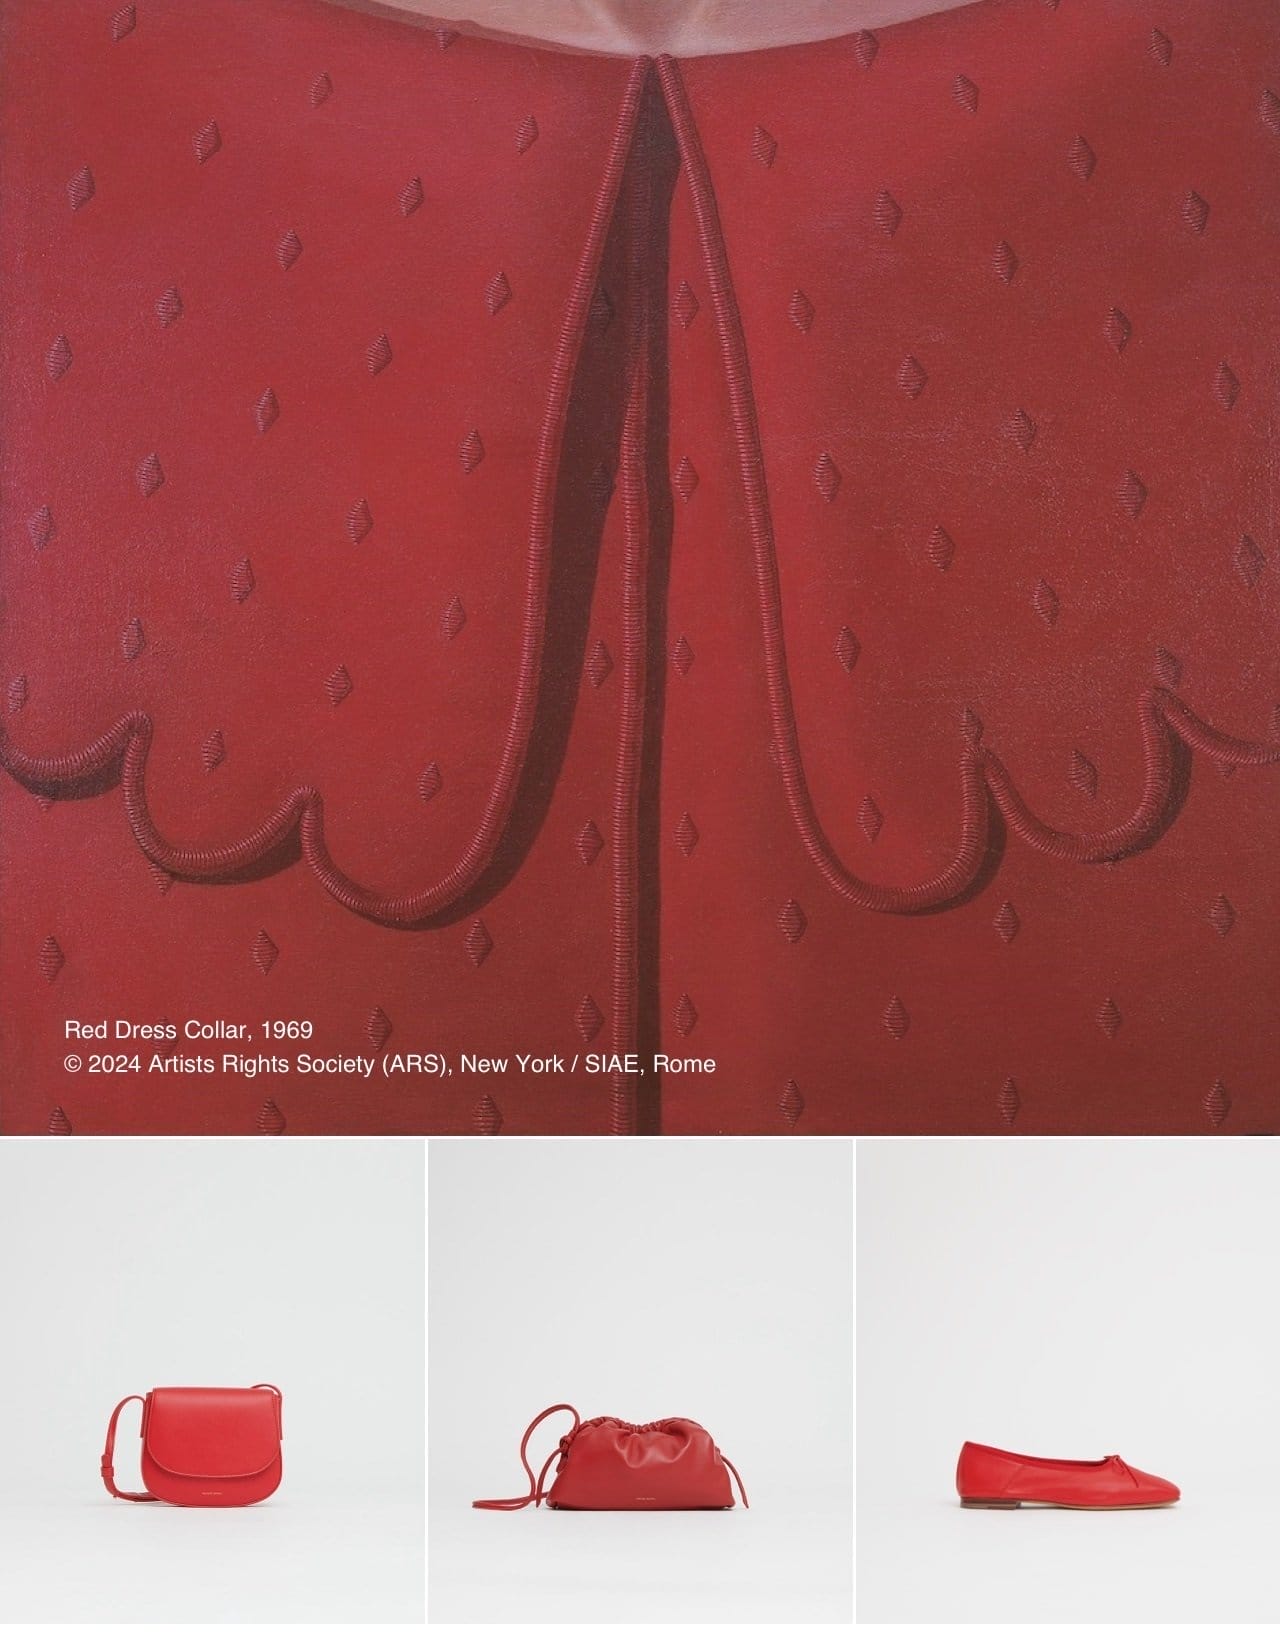 Shop bags and shoes inspired by Domenico Gnoli's piece Red Dress Collar, 1969.